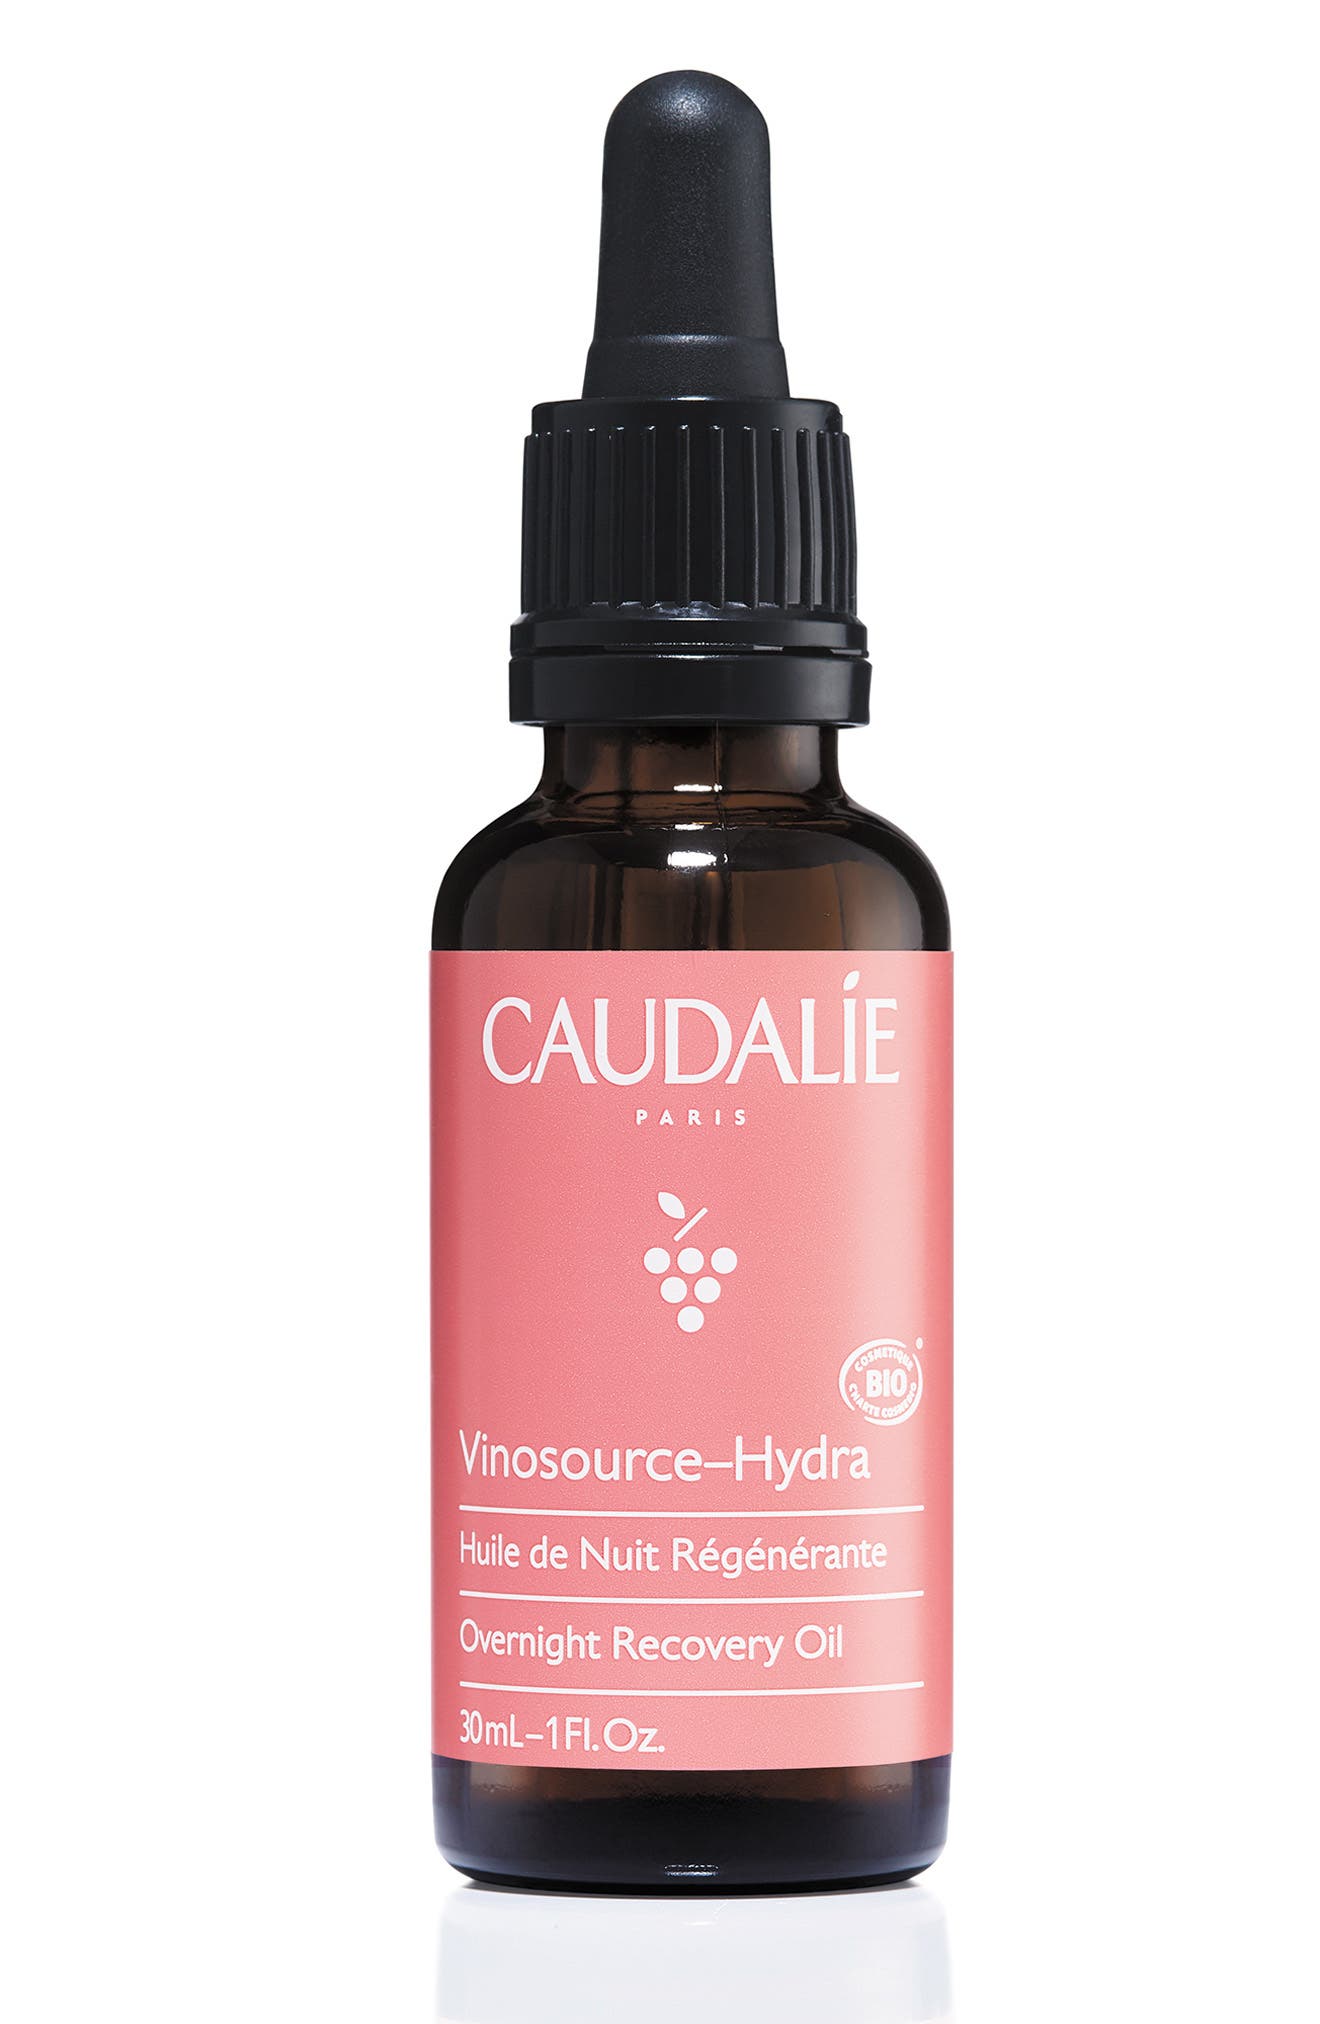 CAUDALIE Vinosource-Hydra Overnight Recovery Oil at Nordstrom